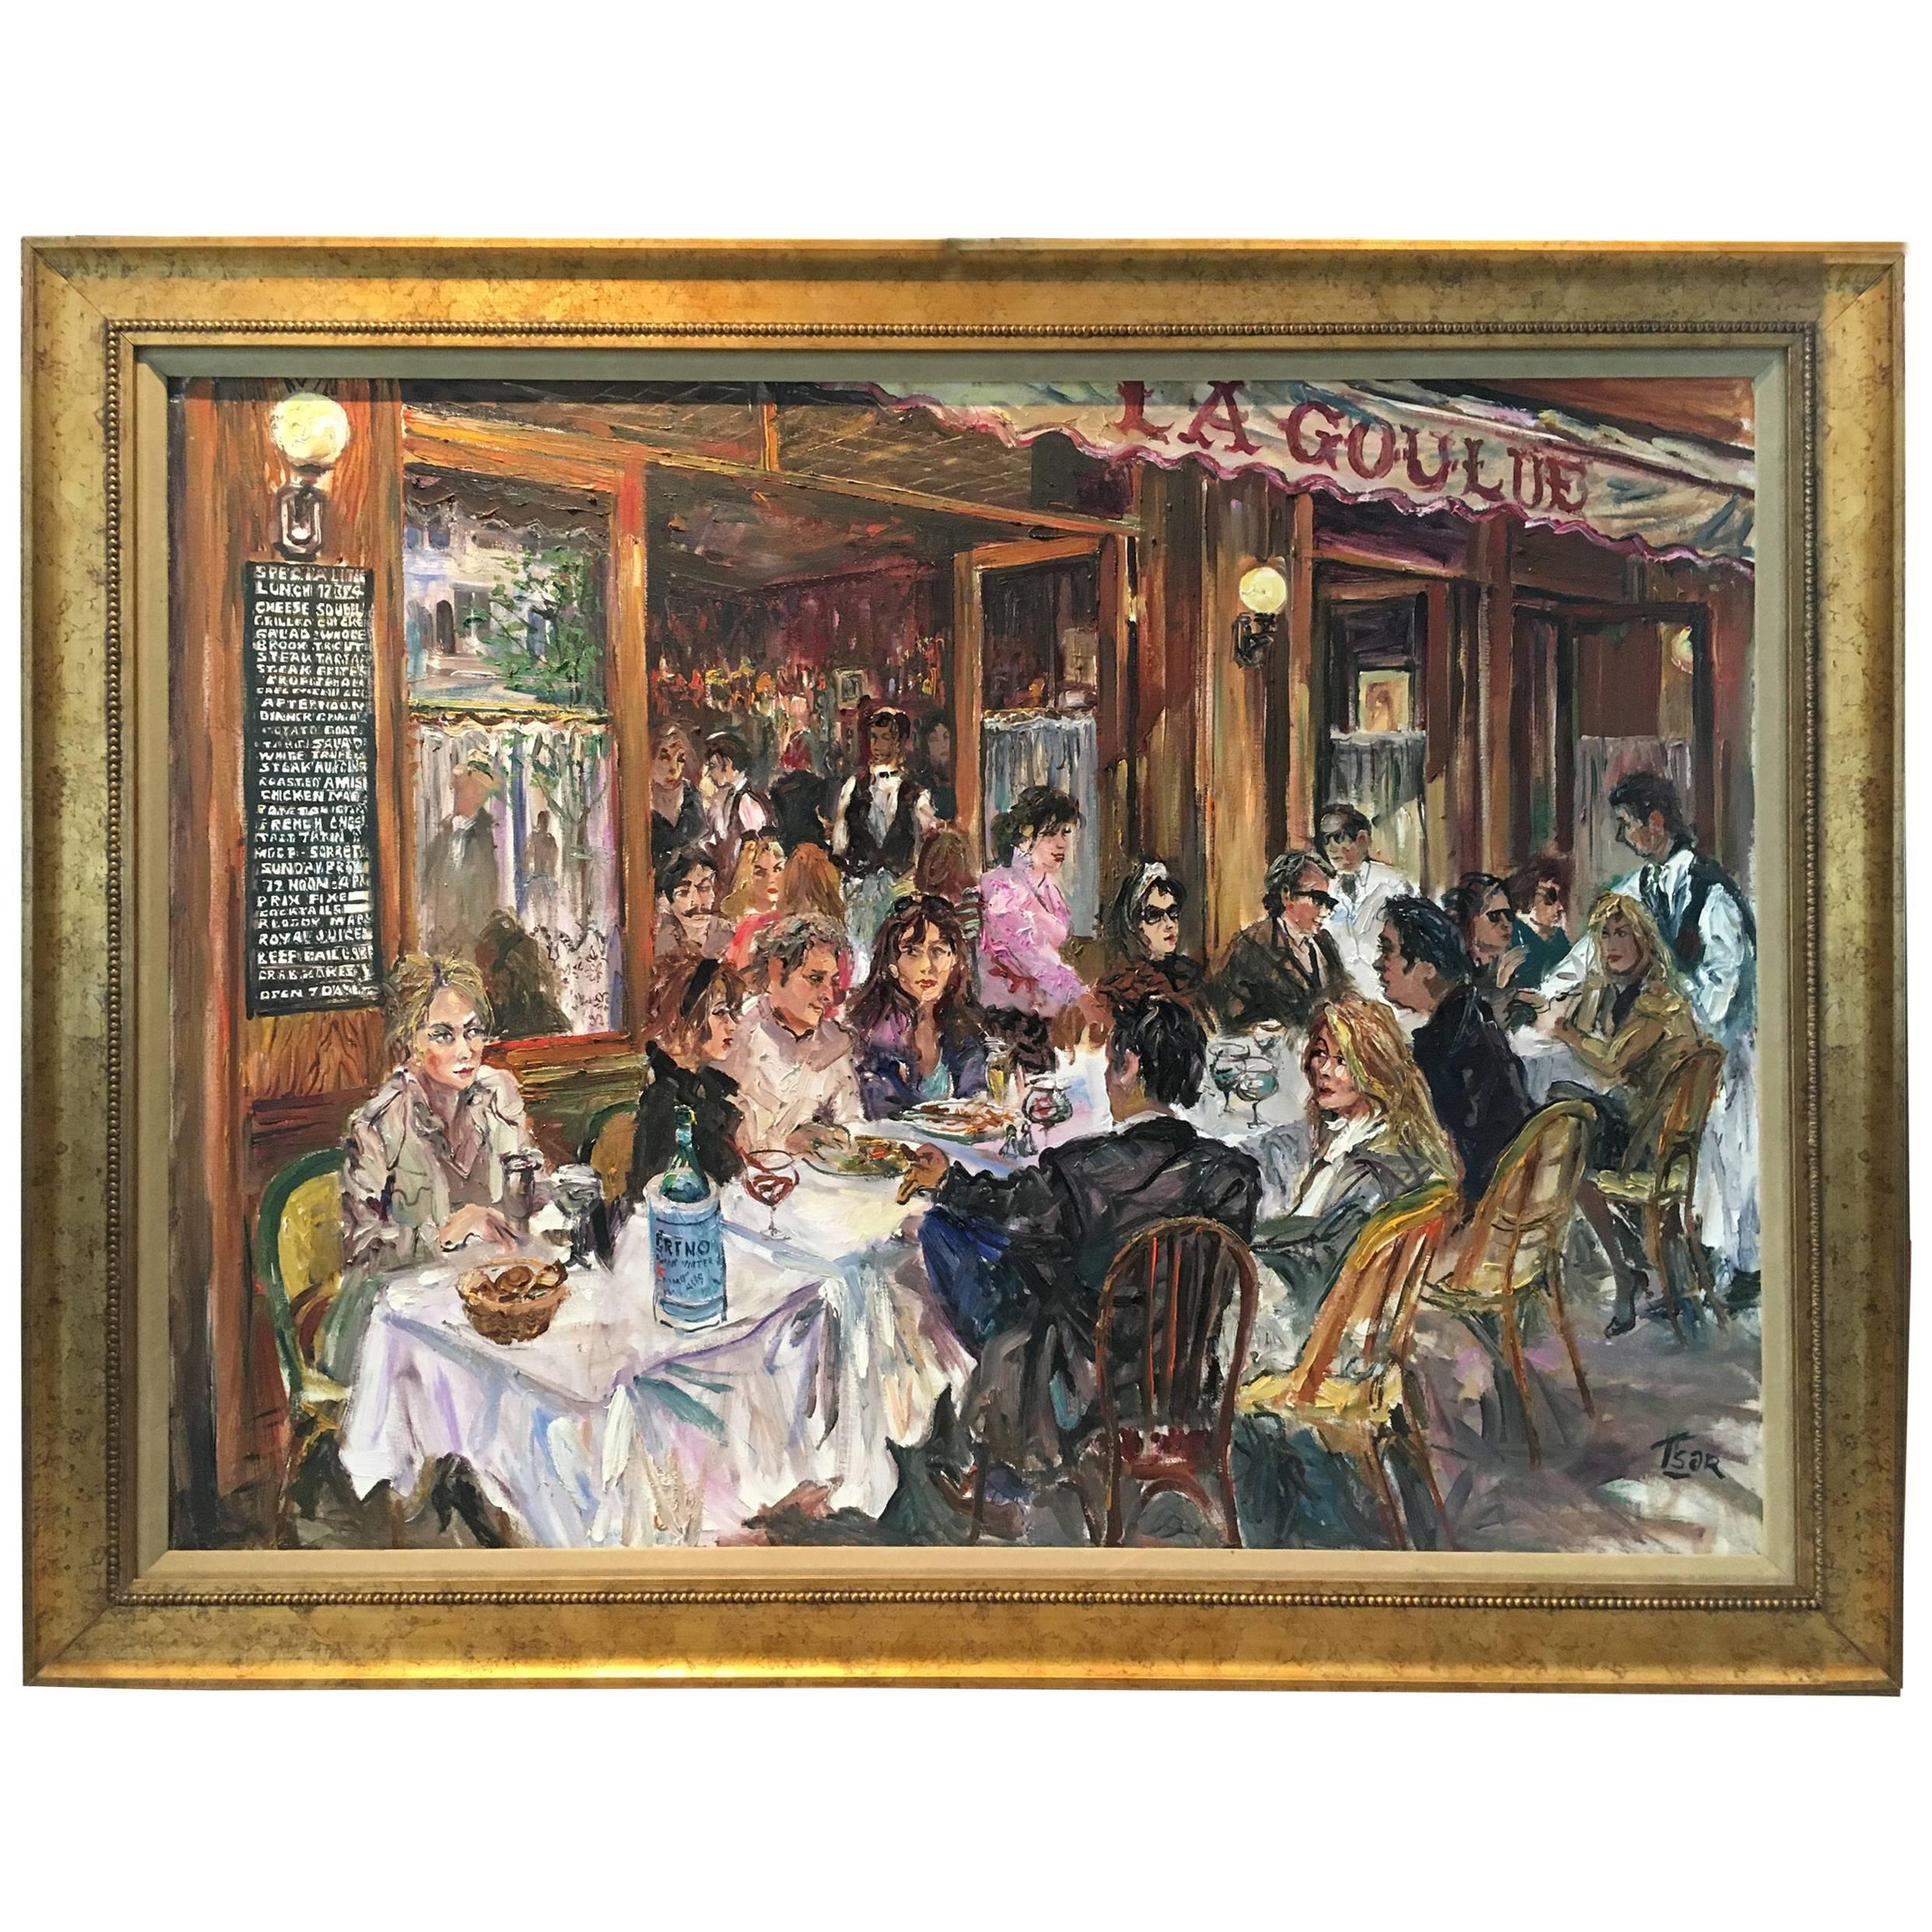 Magical Impressionist Painting of La Goulue Restaurant by Tsar